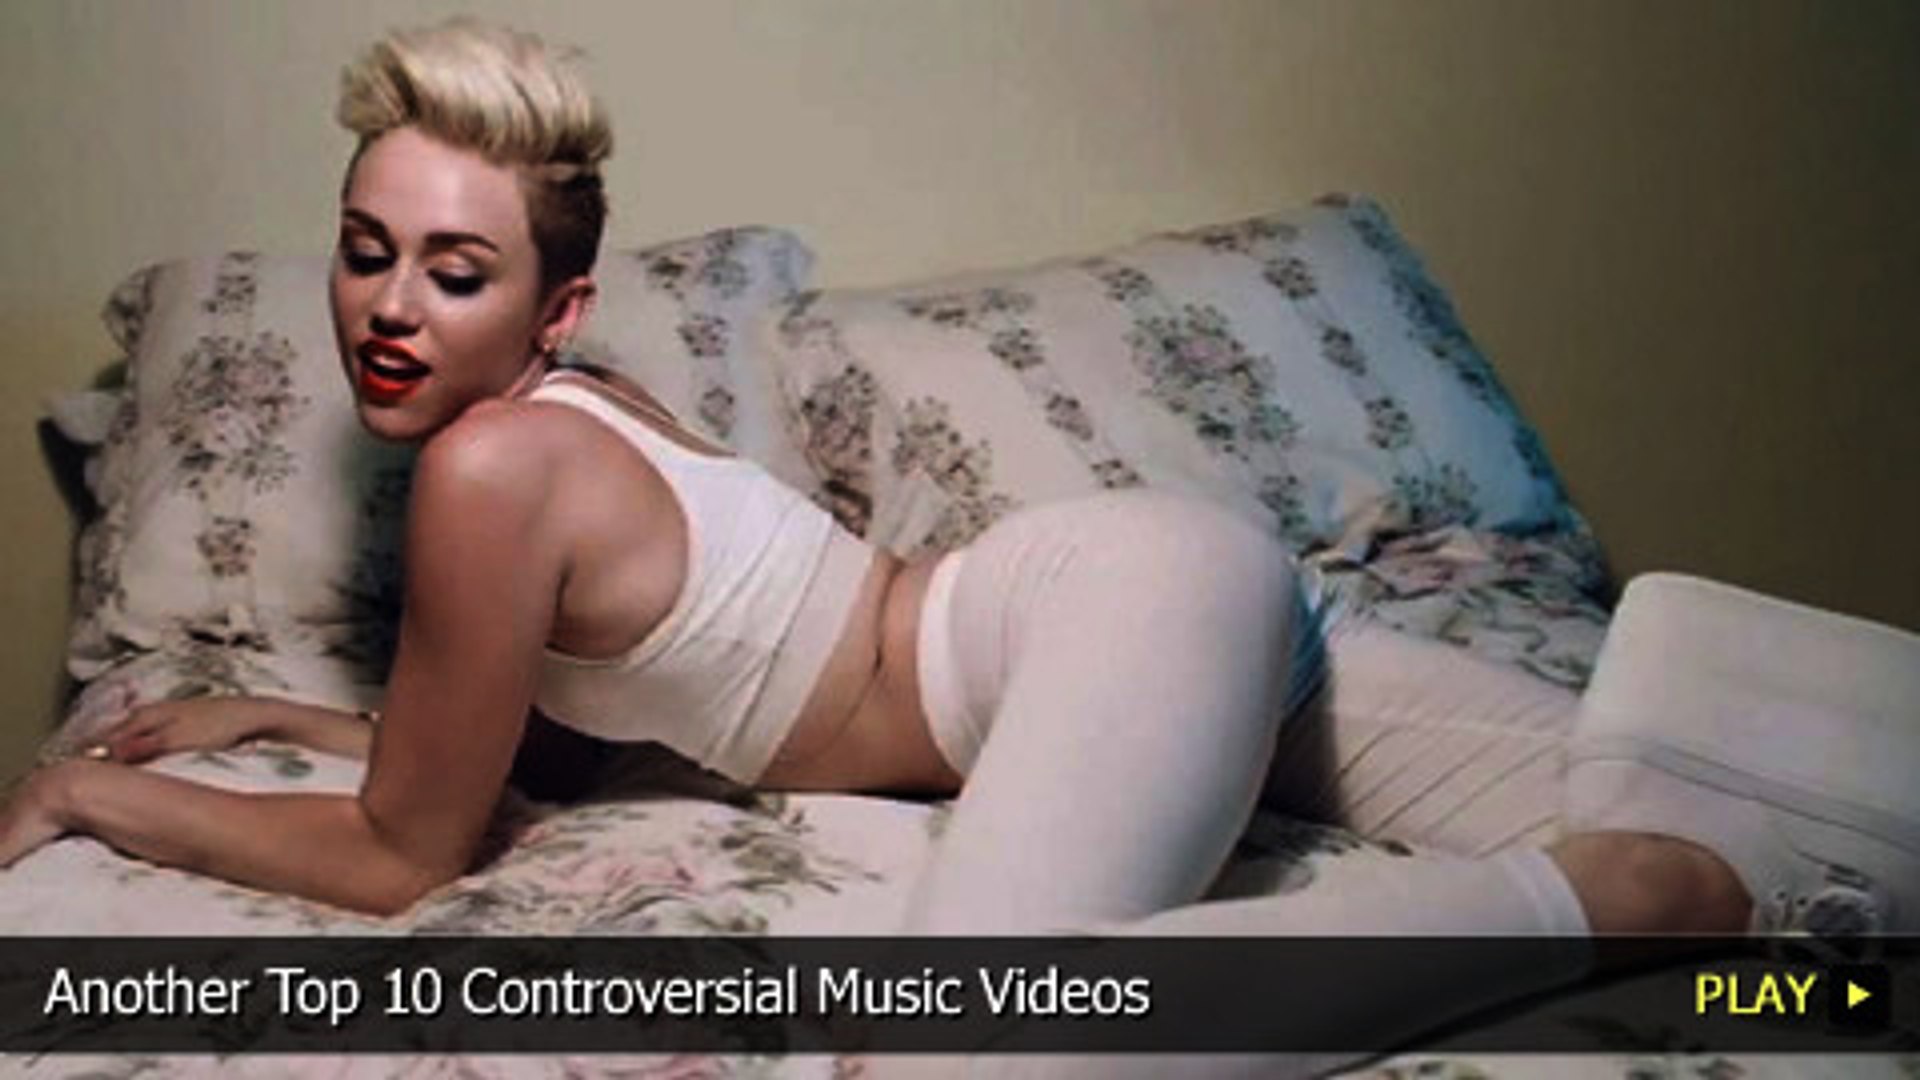 Another Top 10 Controversial Music Videos